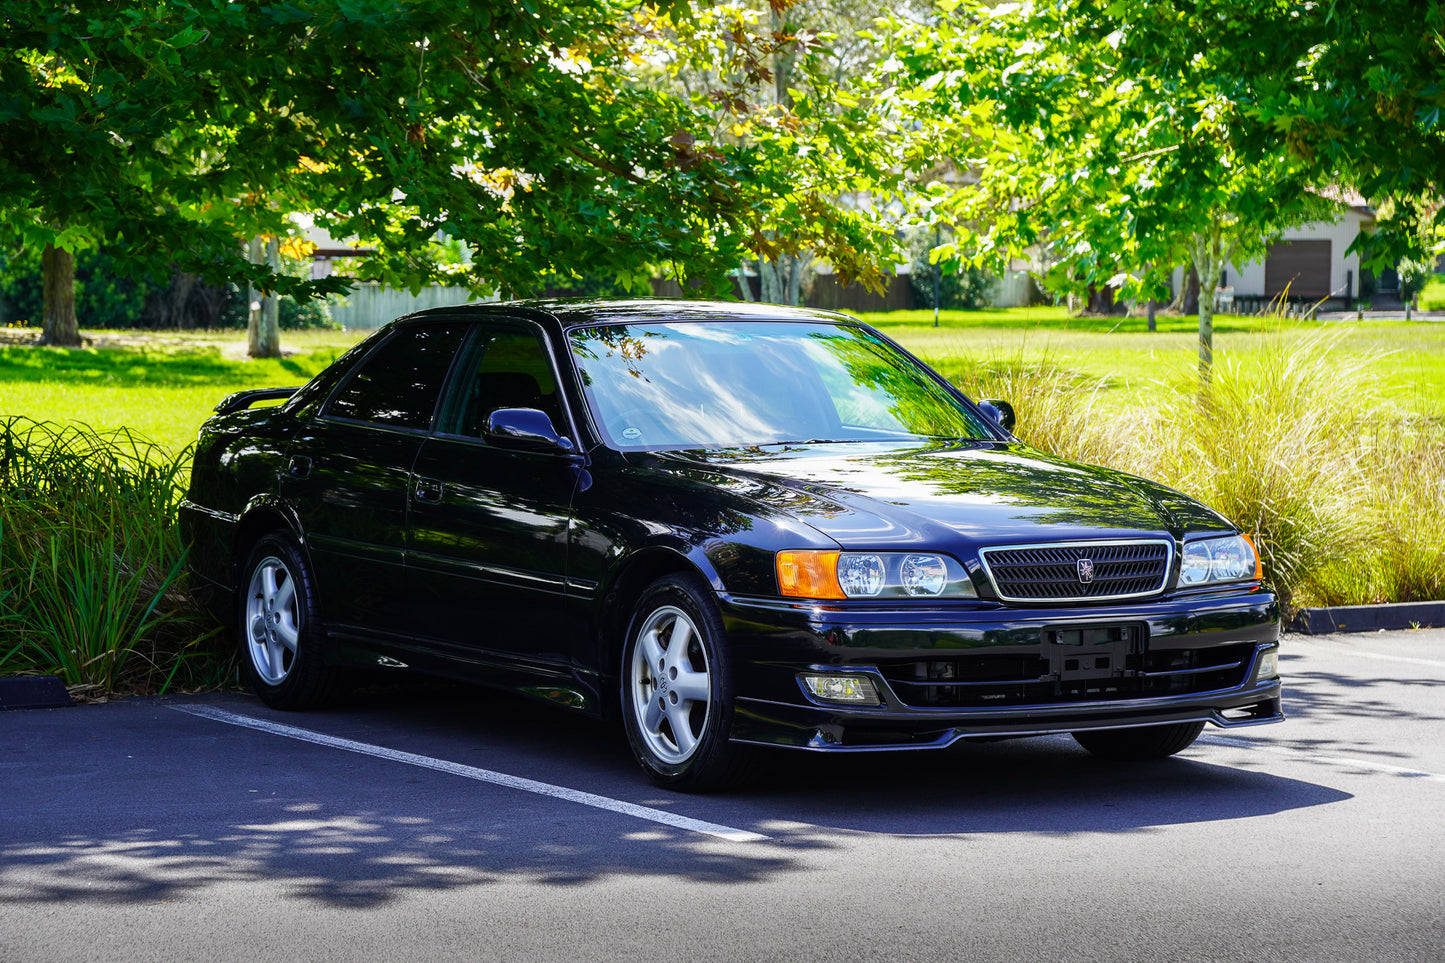 Toyota Chaser JZX100 - 2000